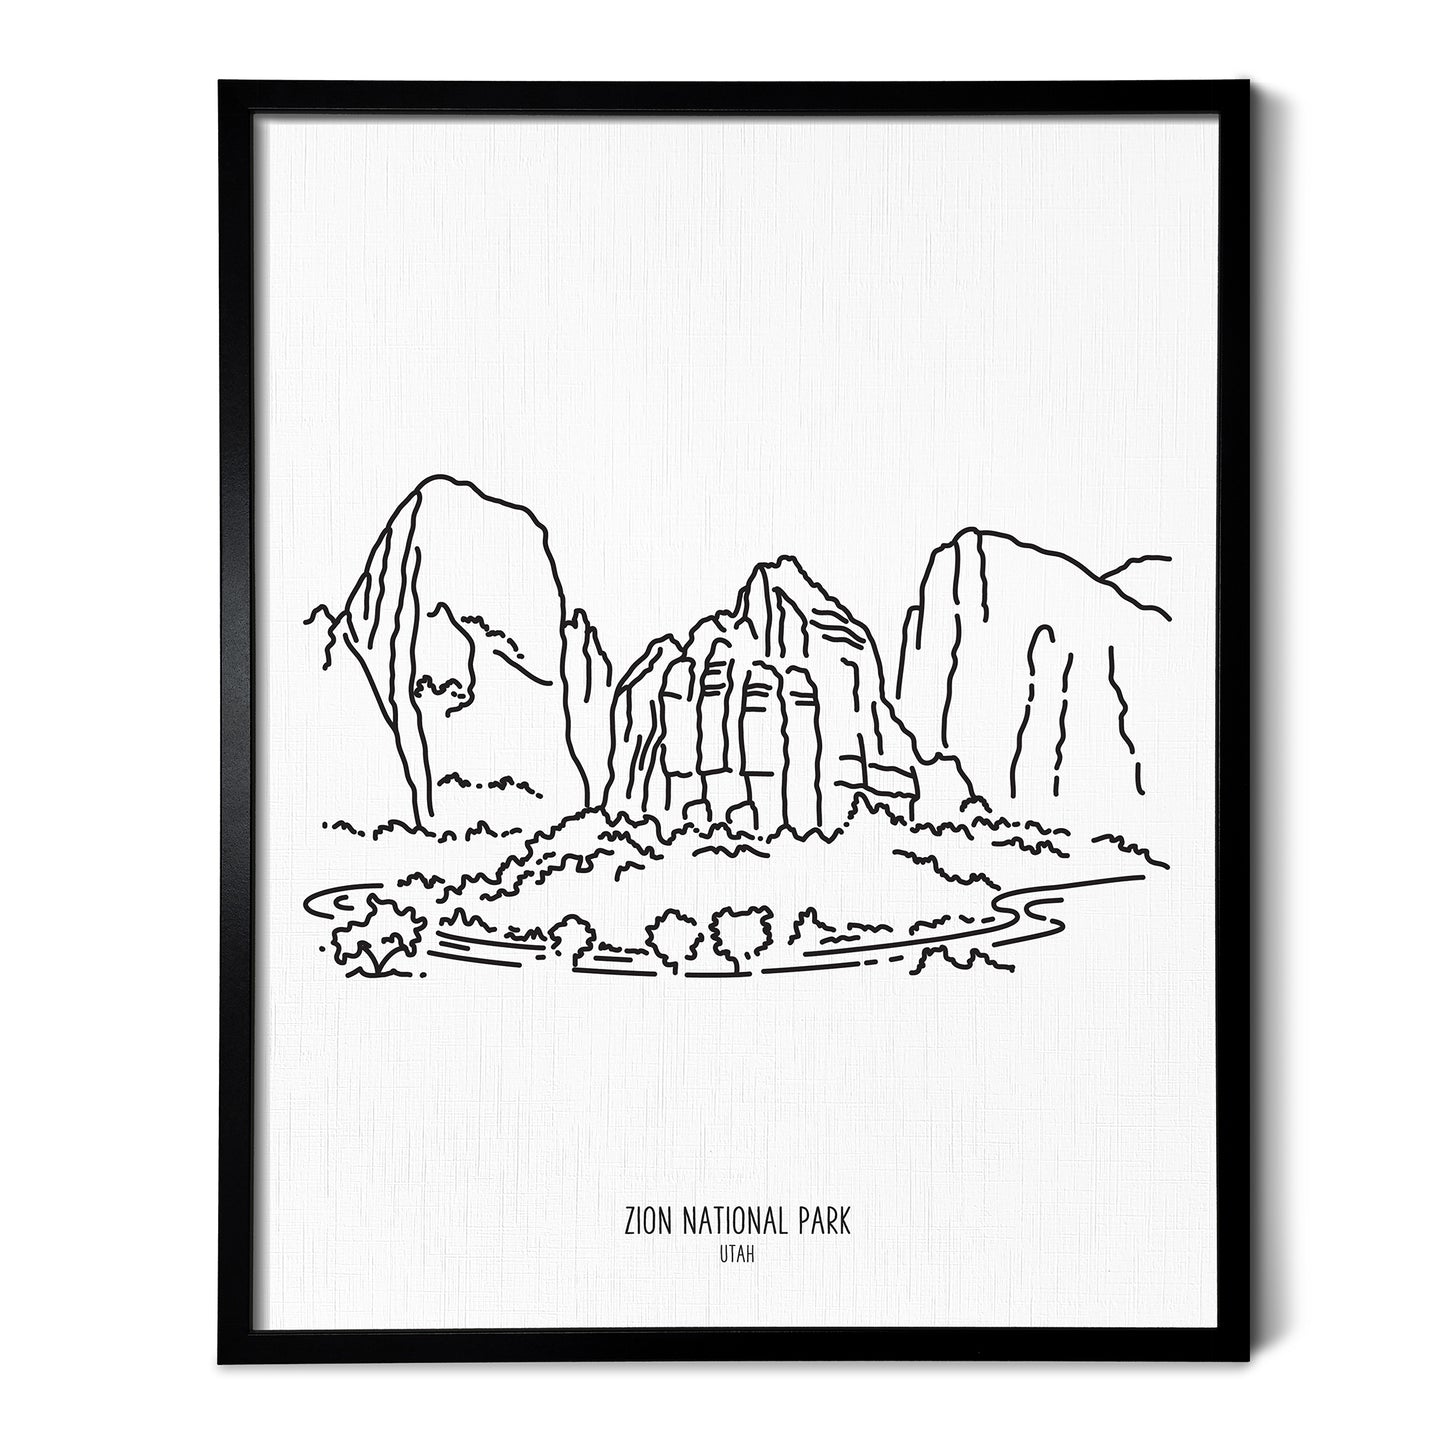 A line art drawing of Zion National Park on white linen paper in a thin black picture frame